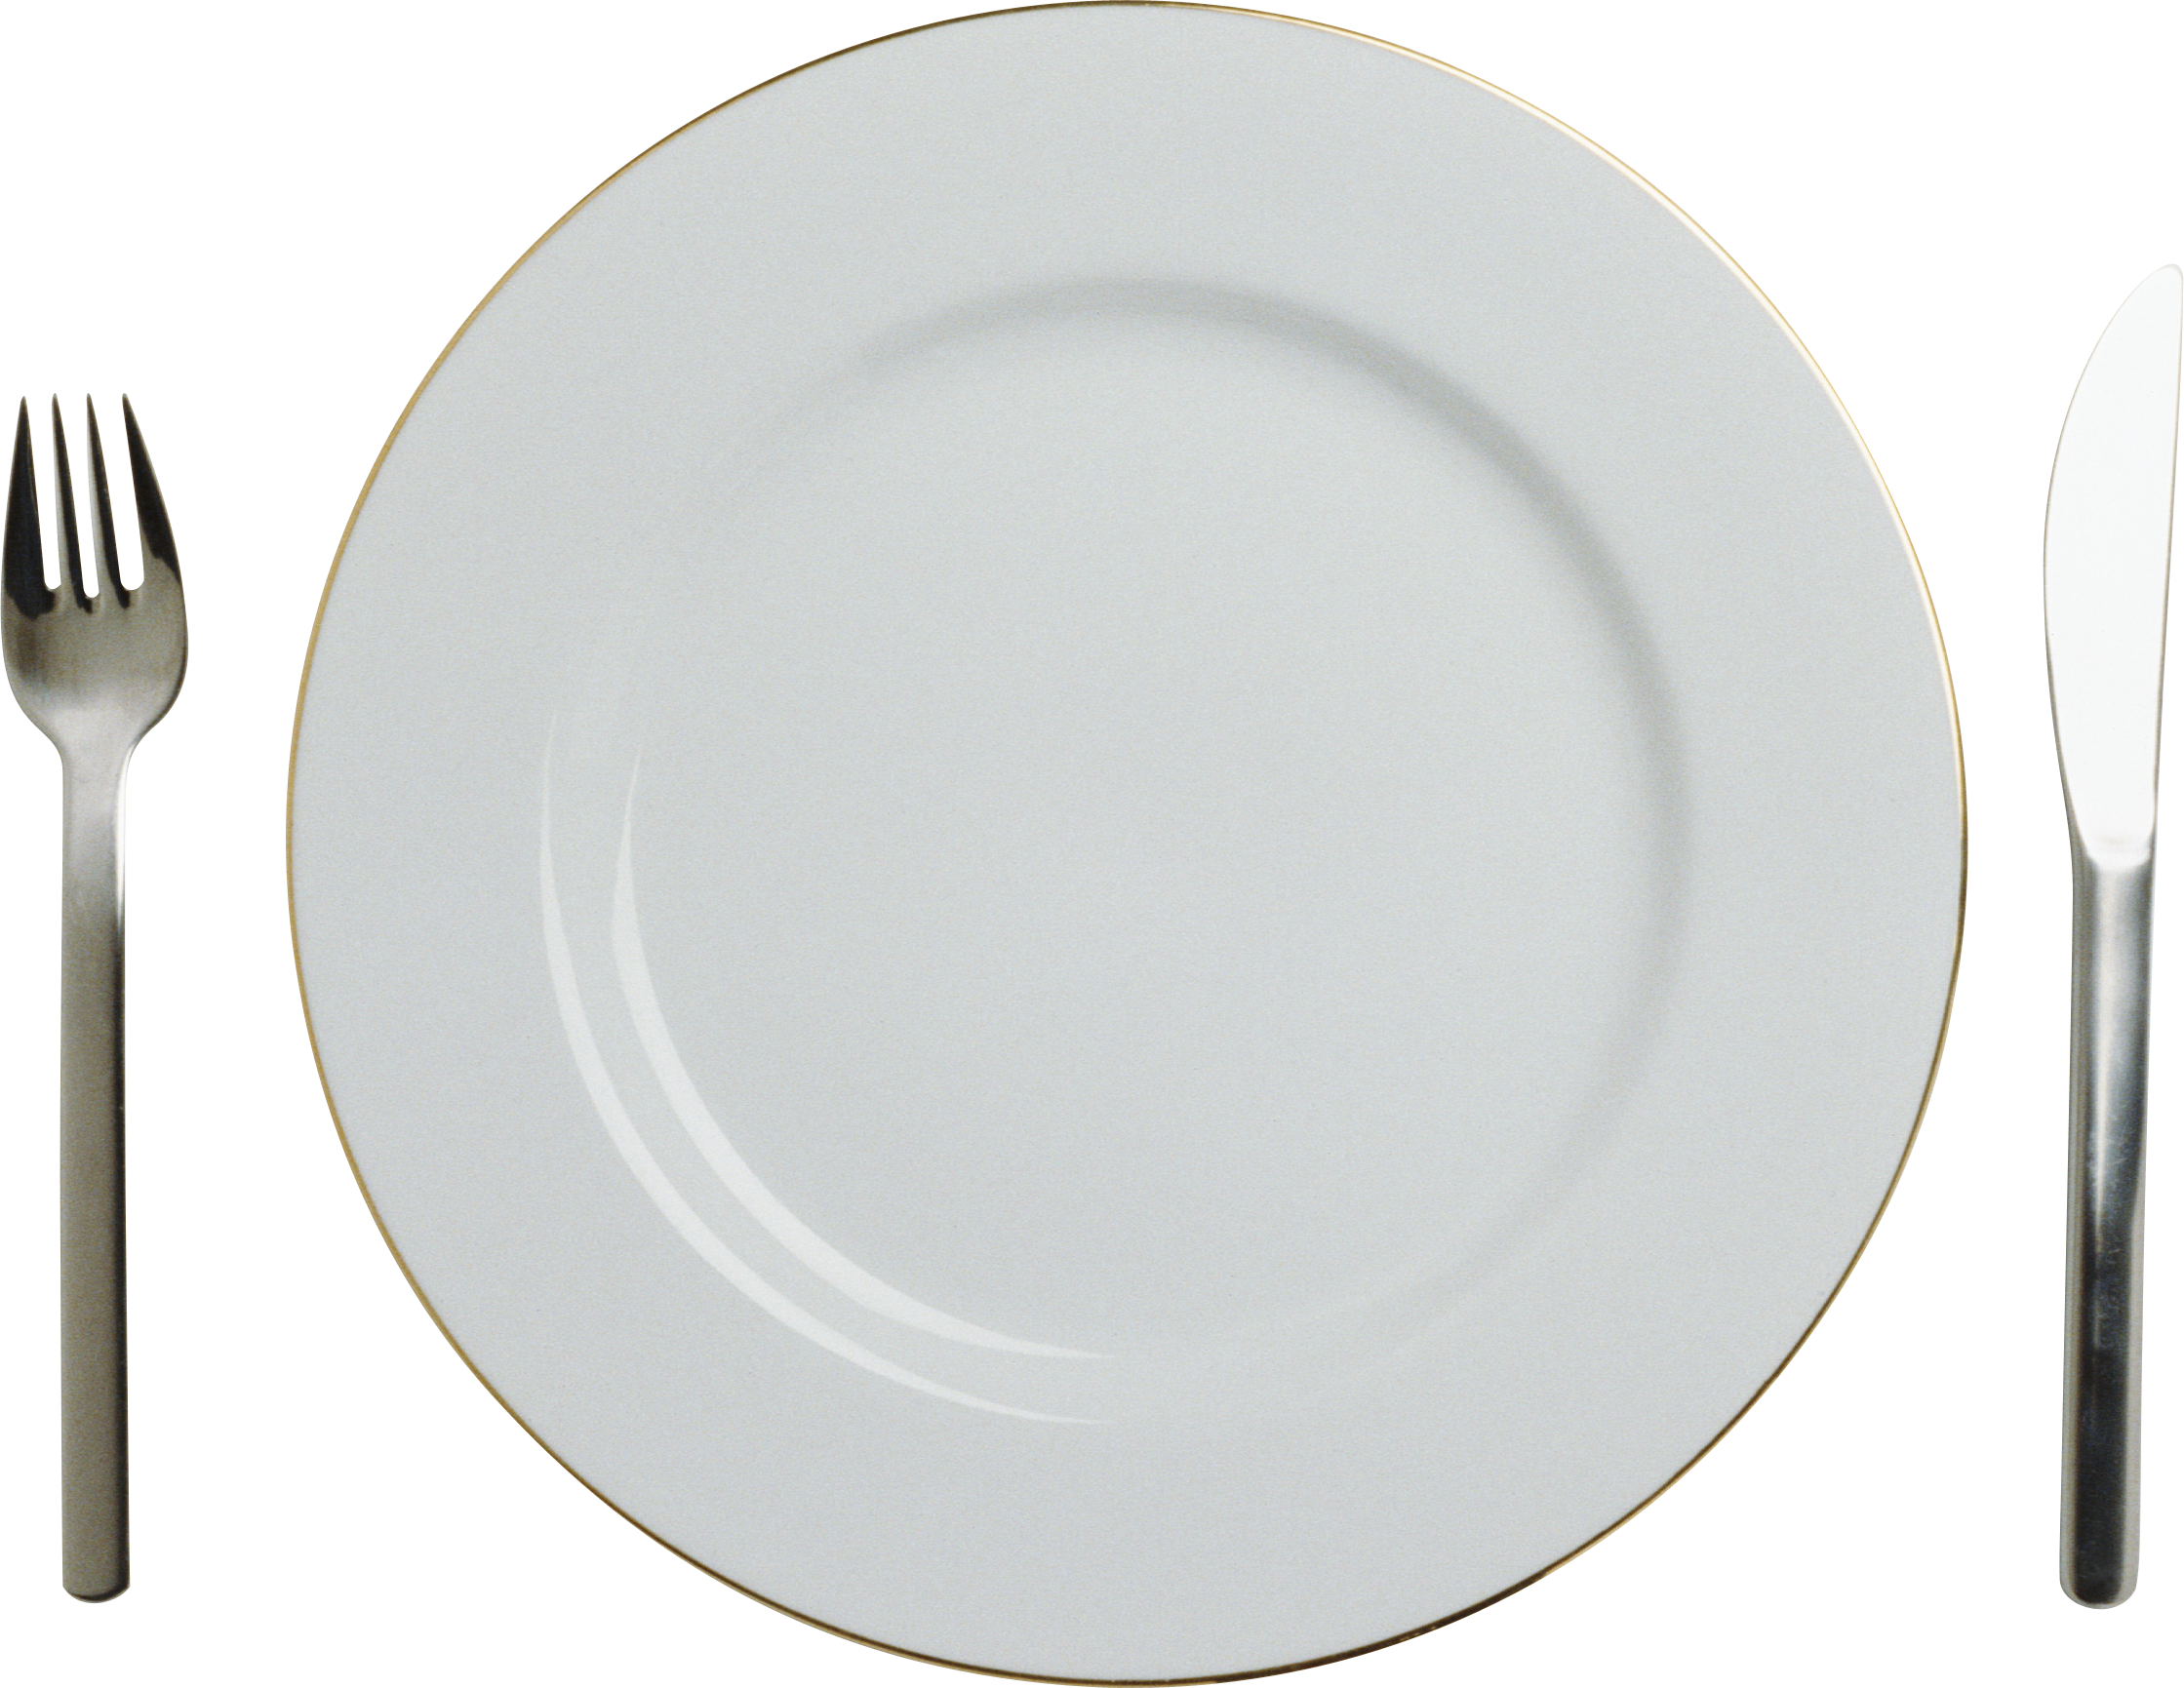 White Plate Png..